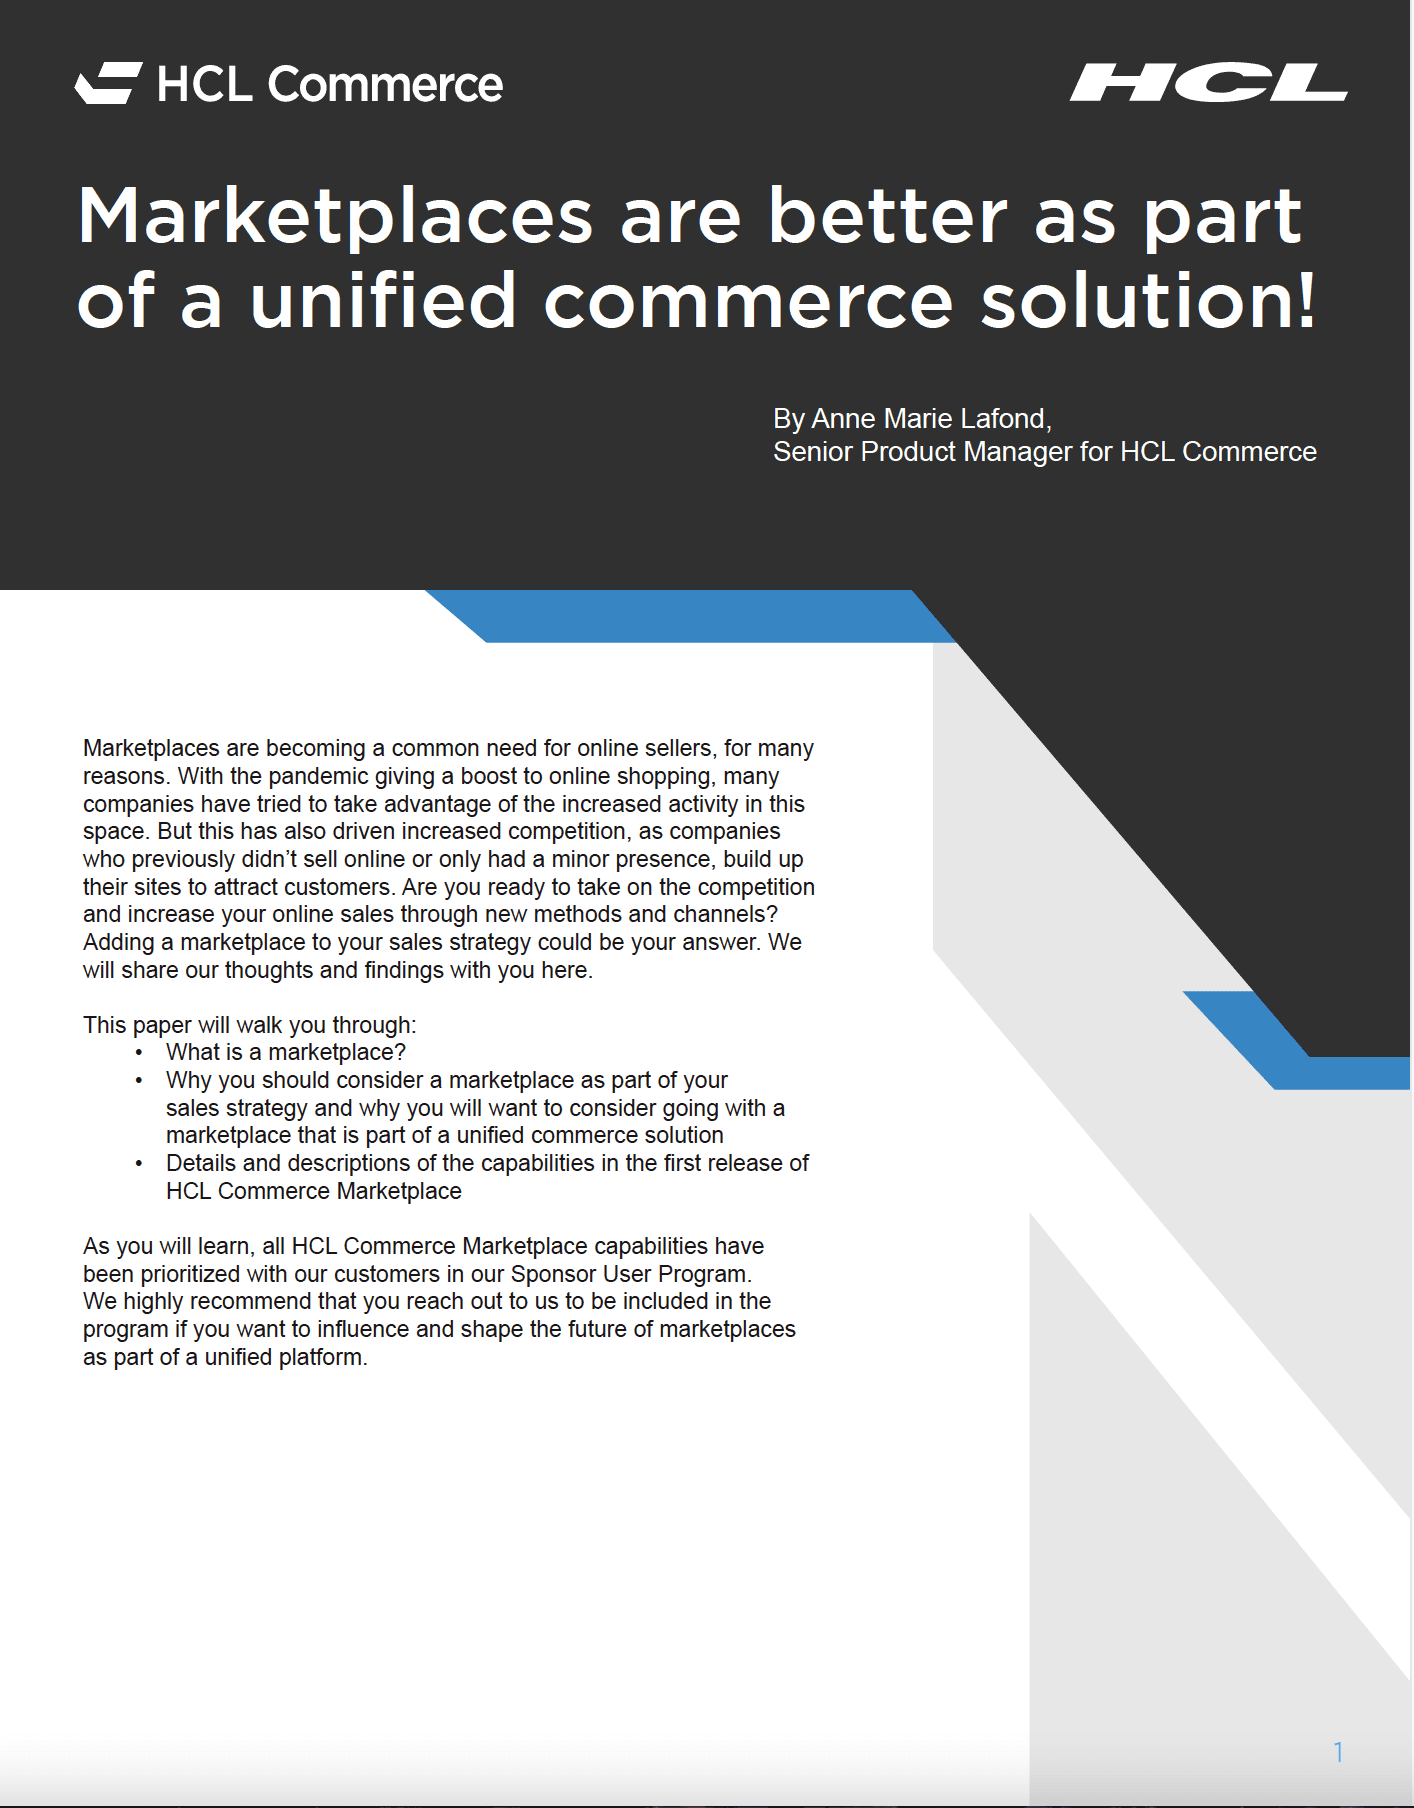 Marketplaces are better as part of a unified commerce solution